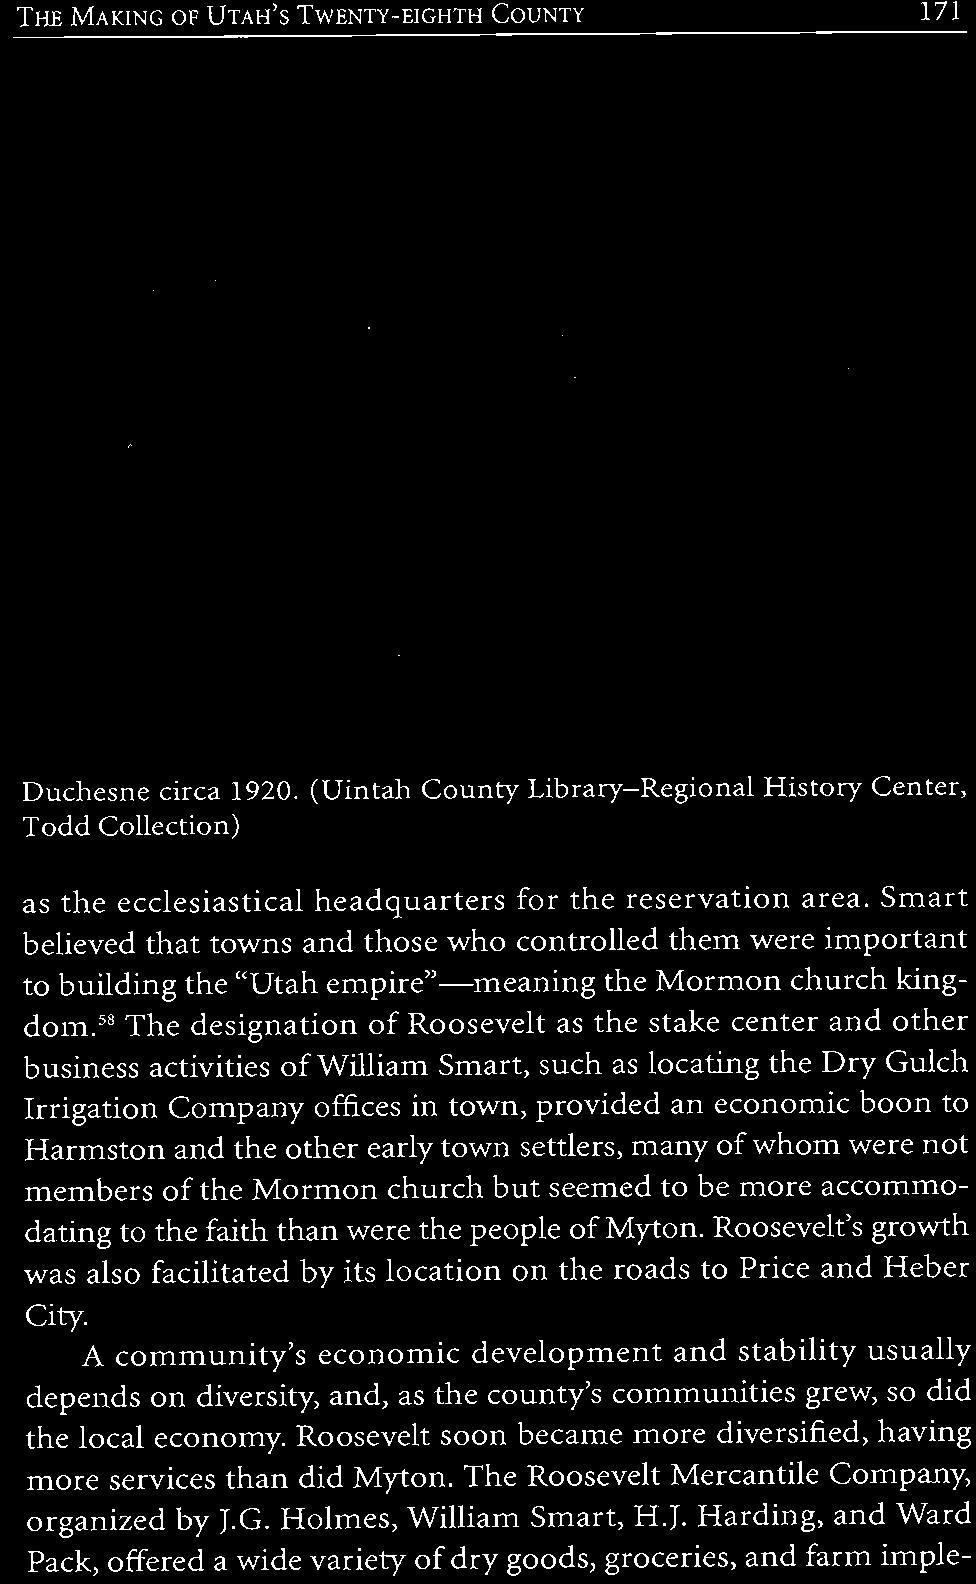 58 The designation of Roosevelt as the stake center and other business activities of William Smart, such as locating the Dry Gulch Irrigation Company offices in town, provided an economic boon to